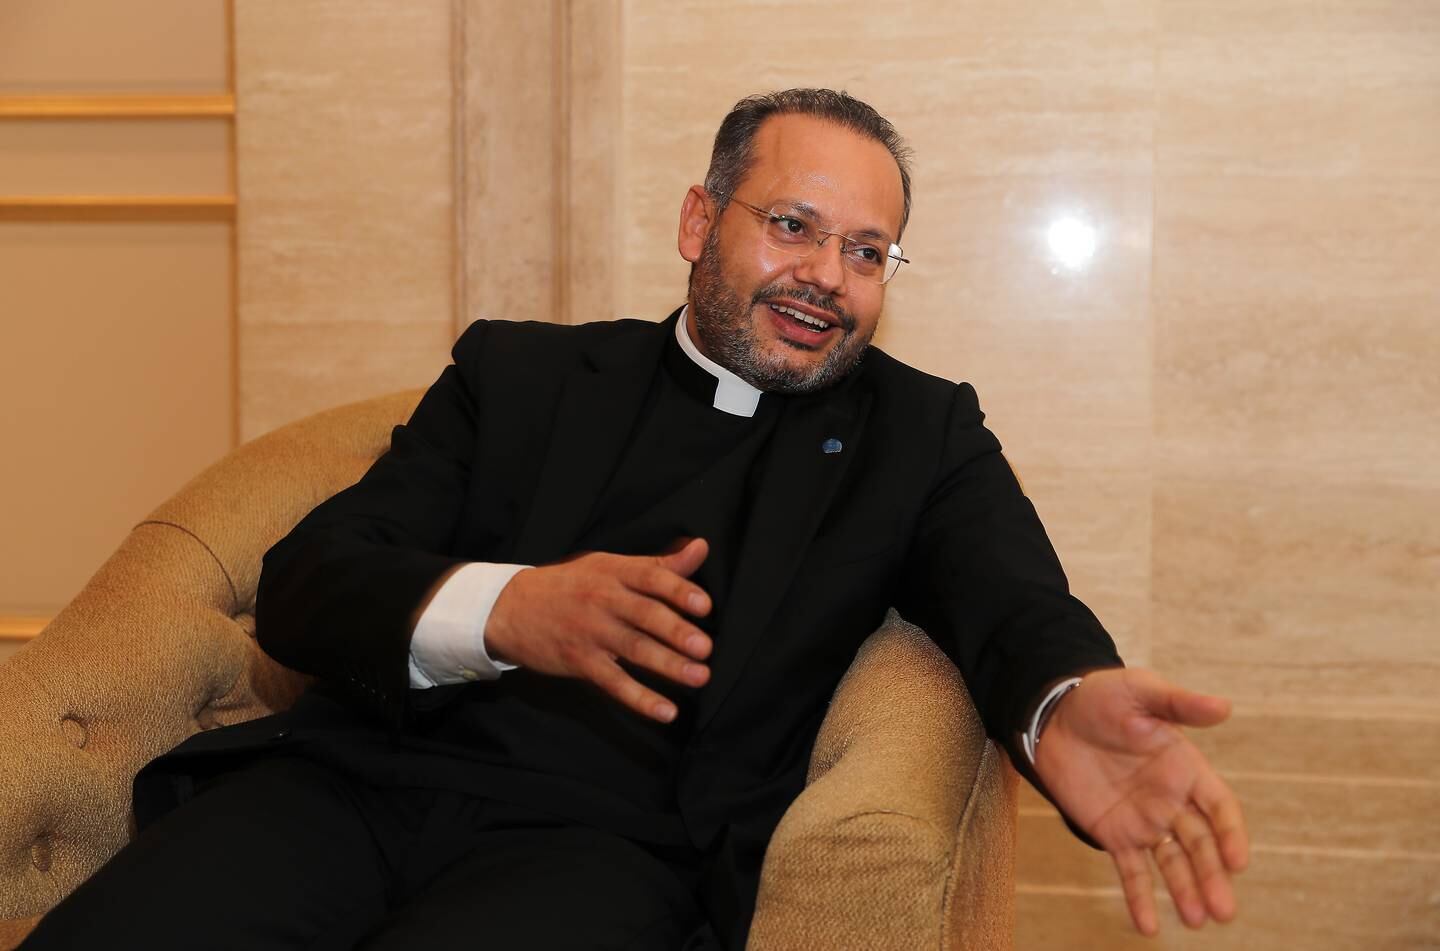 Monsignor Yoannis Lahzi Gaid, former personal secretary to Pope Francis and a member of the Higher Committee for Human Fraternity, in Abu Dhabi. Pawan Singh / The National 